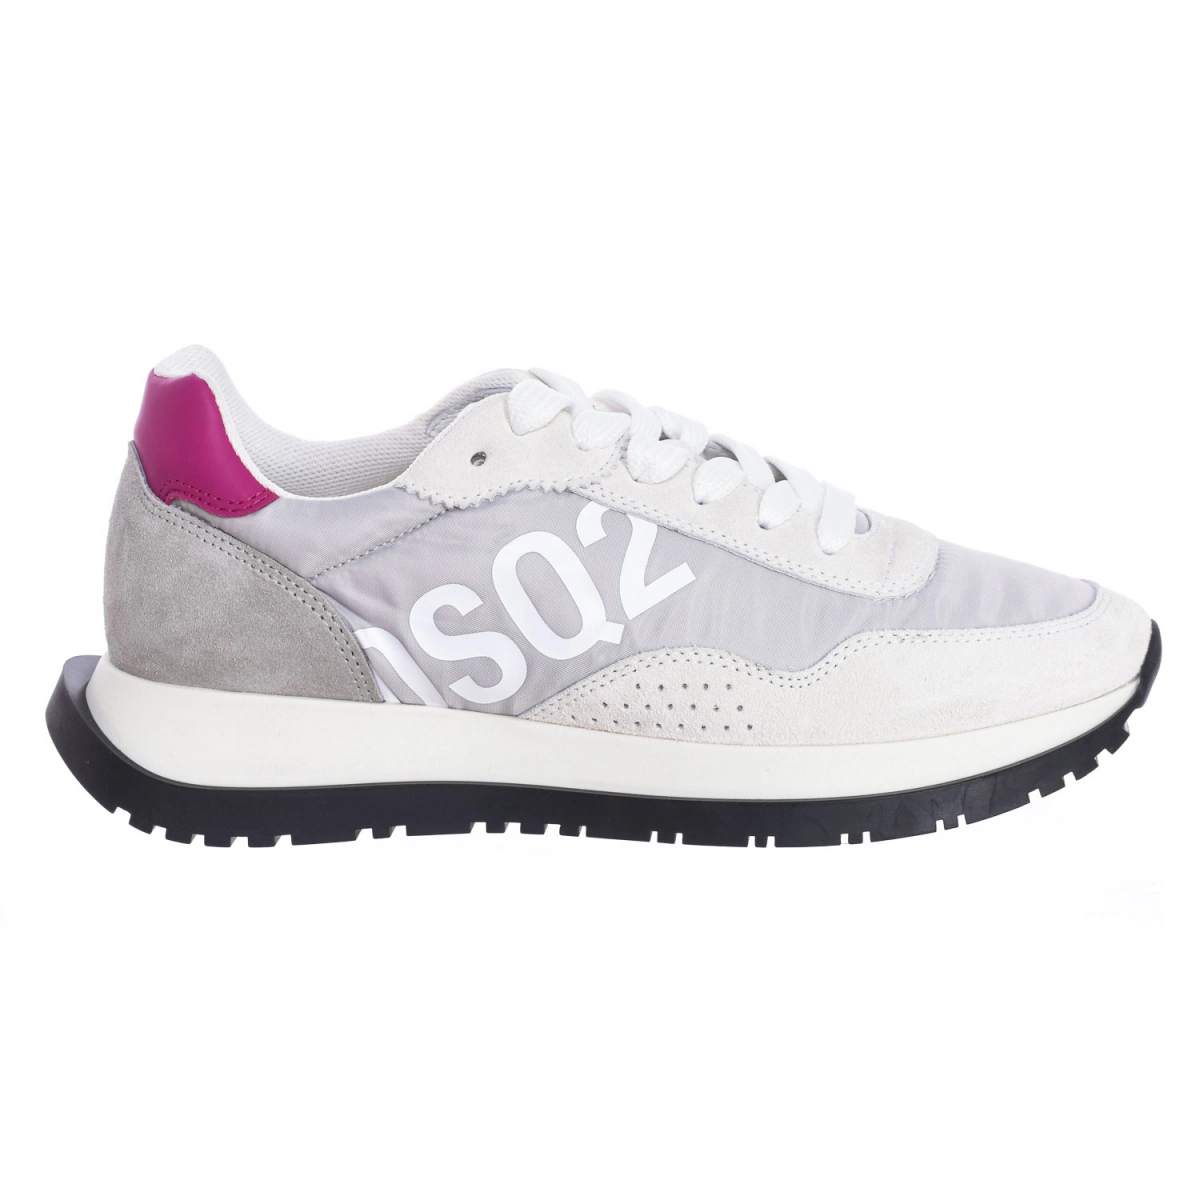 Zapatillas Deportivas DSQUARED2 Running Dsquared2 SNW0212-01601681 mujer Talla: 39 Color: Gris SNW0212-01601681-M2580.39